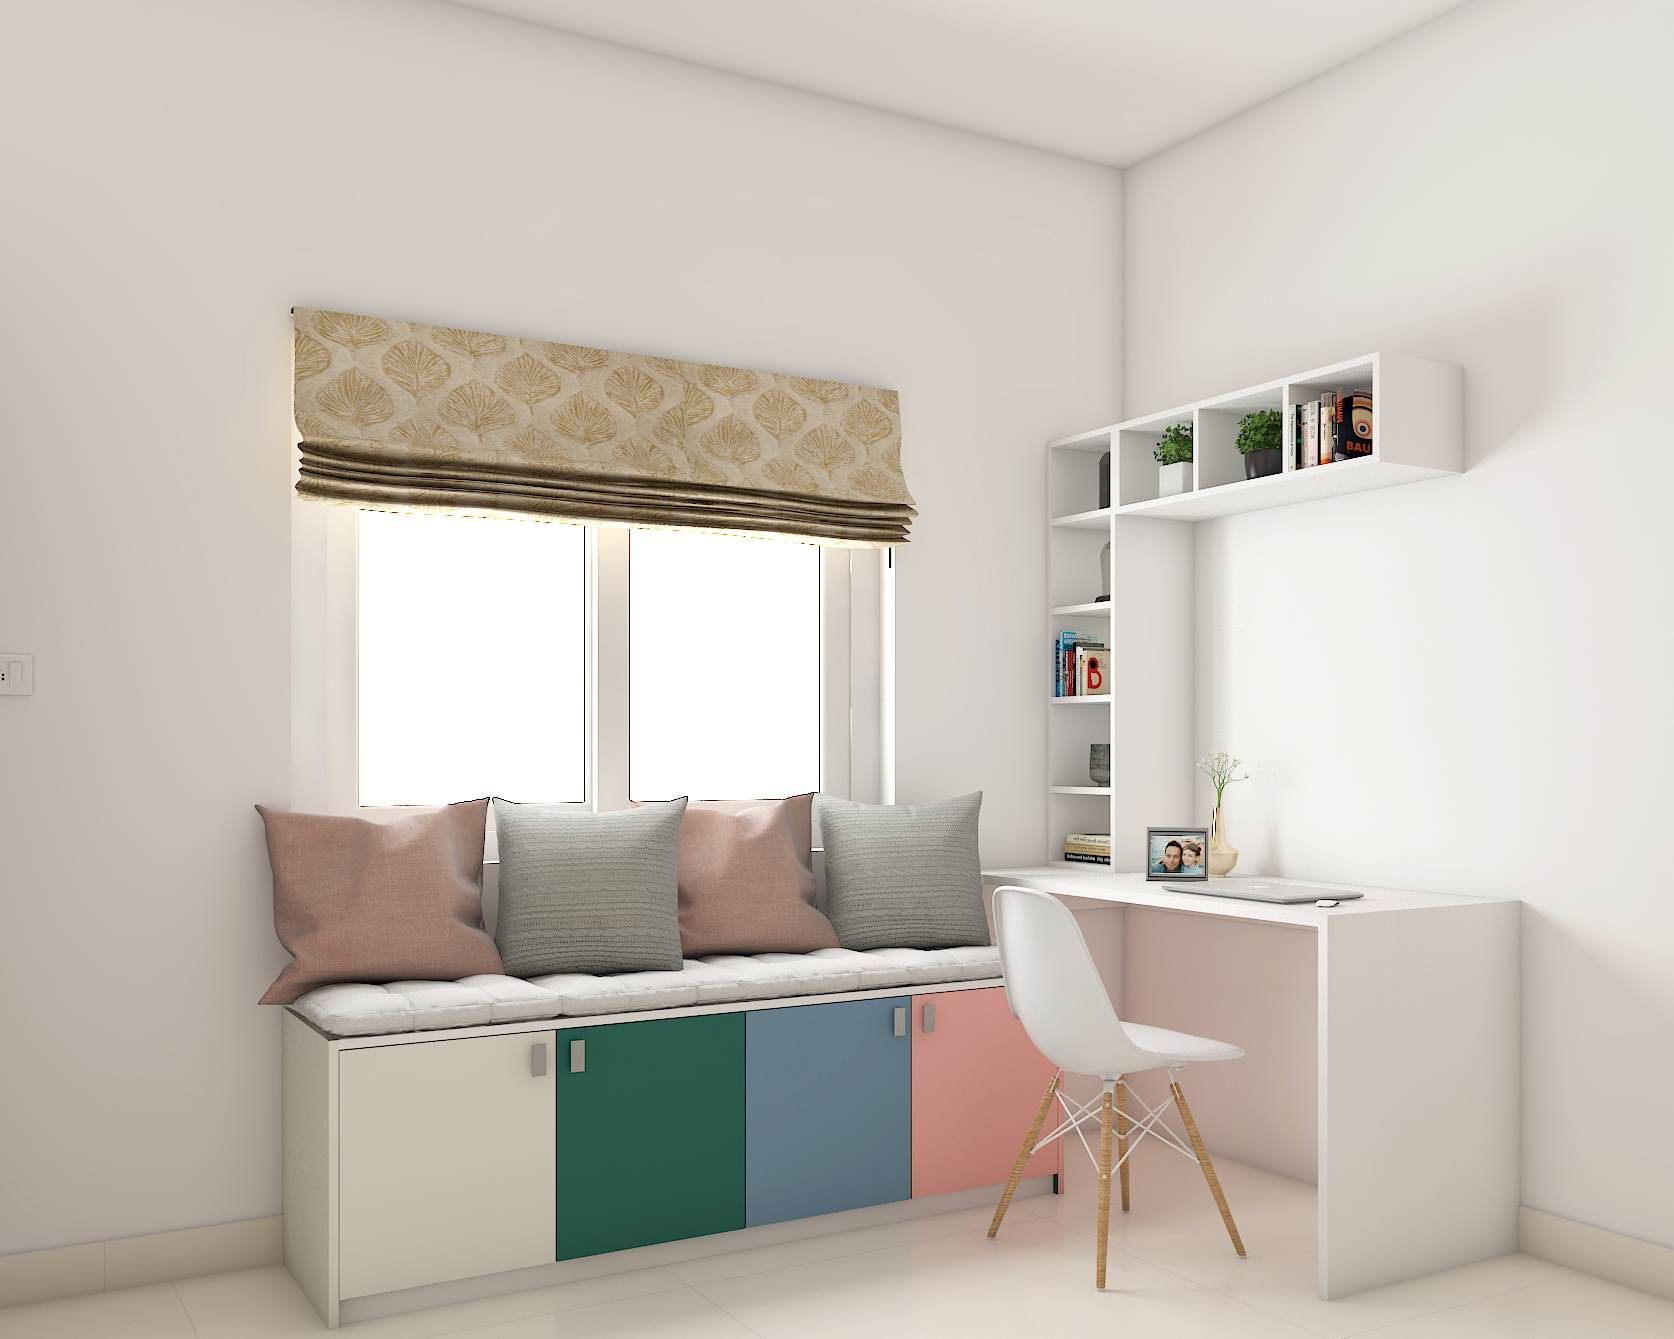 Study Room With Minimalist Interior Design And Colourful Seater Storage With Integrated Grey Wardrobe Design